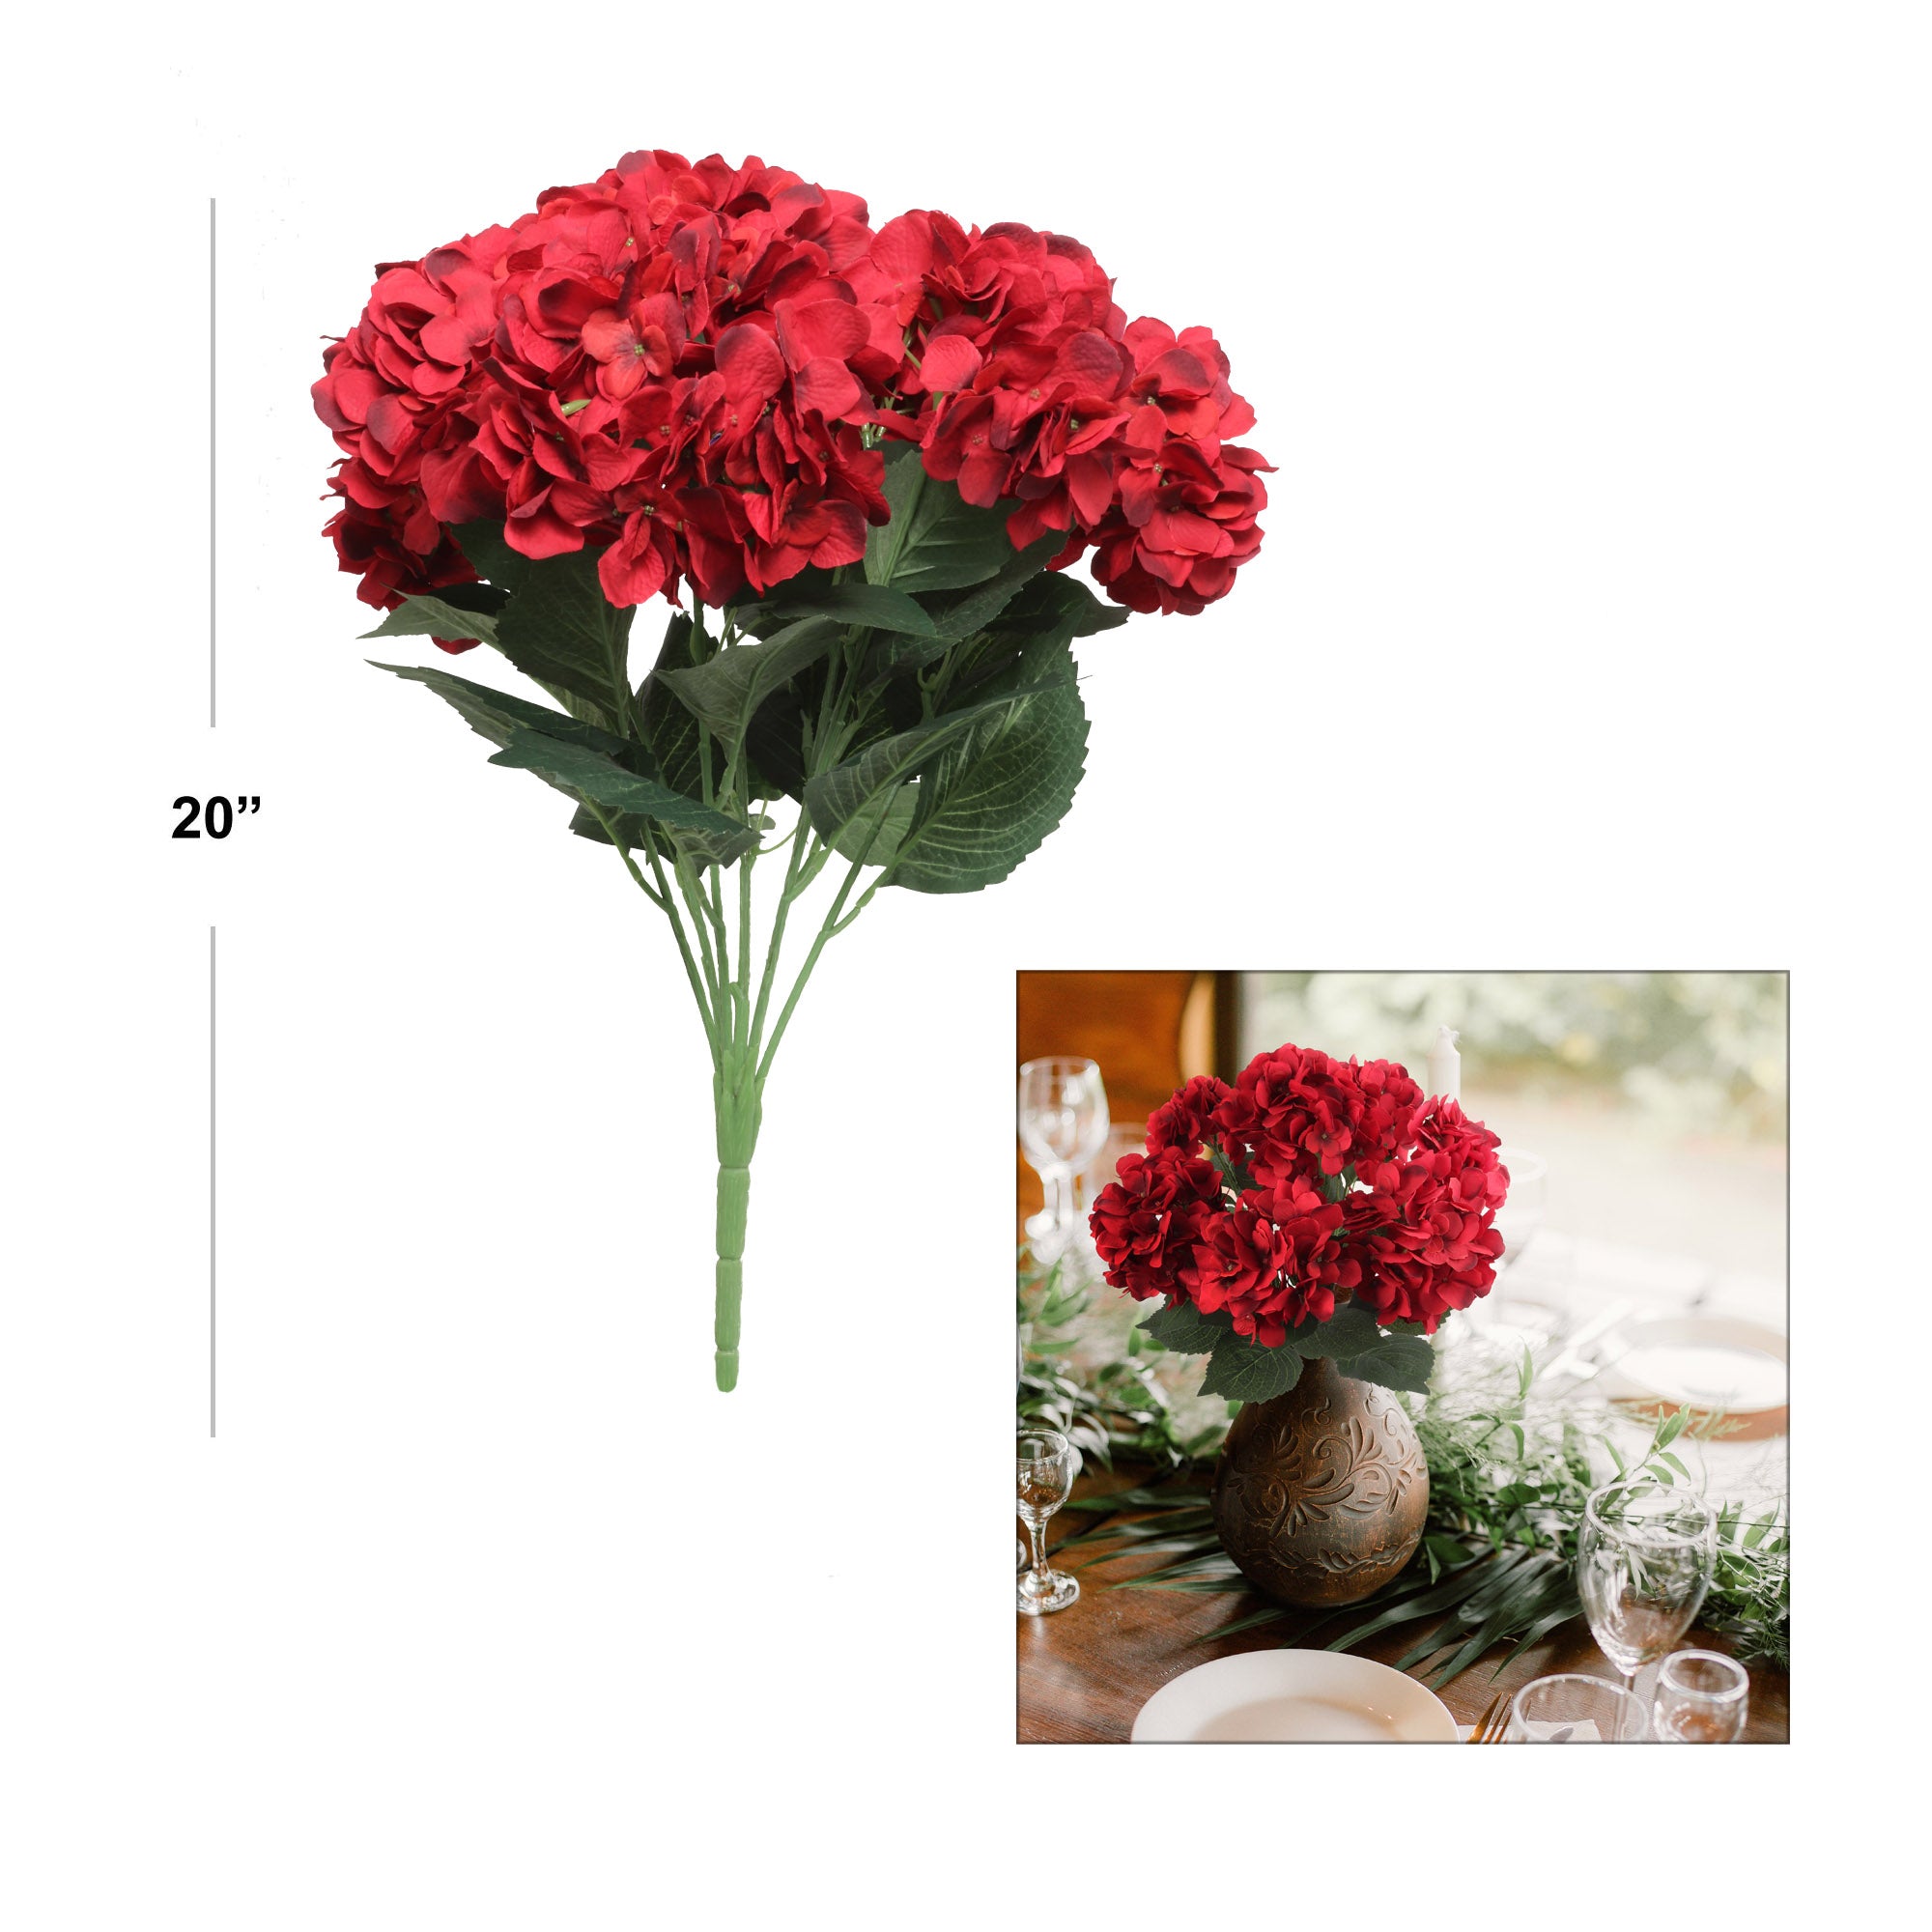 Alluring 20" Red Hydrangea Bush - Luxurious Faux Flowers for Home Decor, Striking Wedding Centerpieces & Dazzling Displays